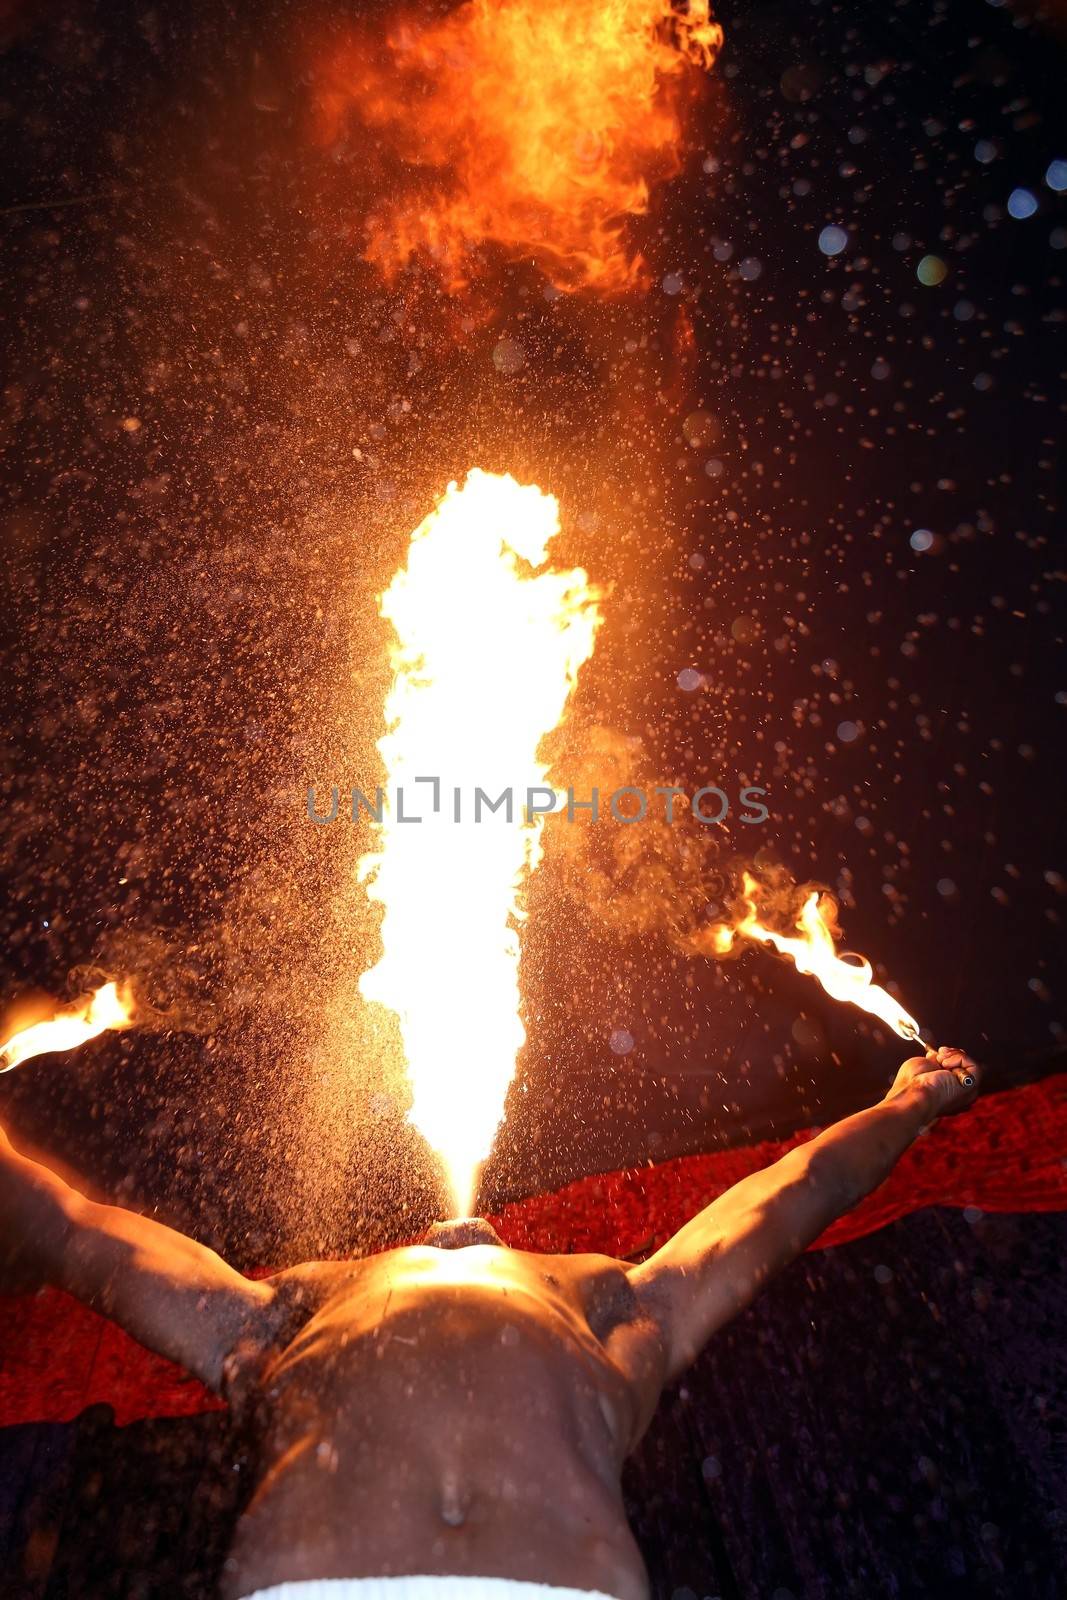 Circus fire-eater blowing a large flame from his mouth